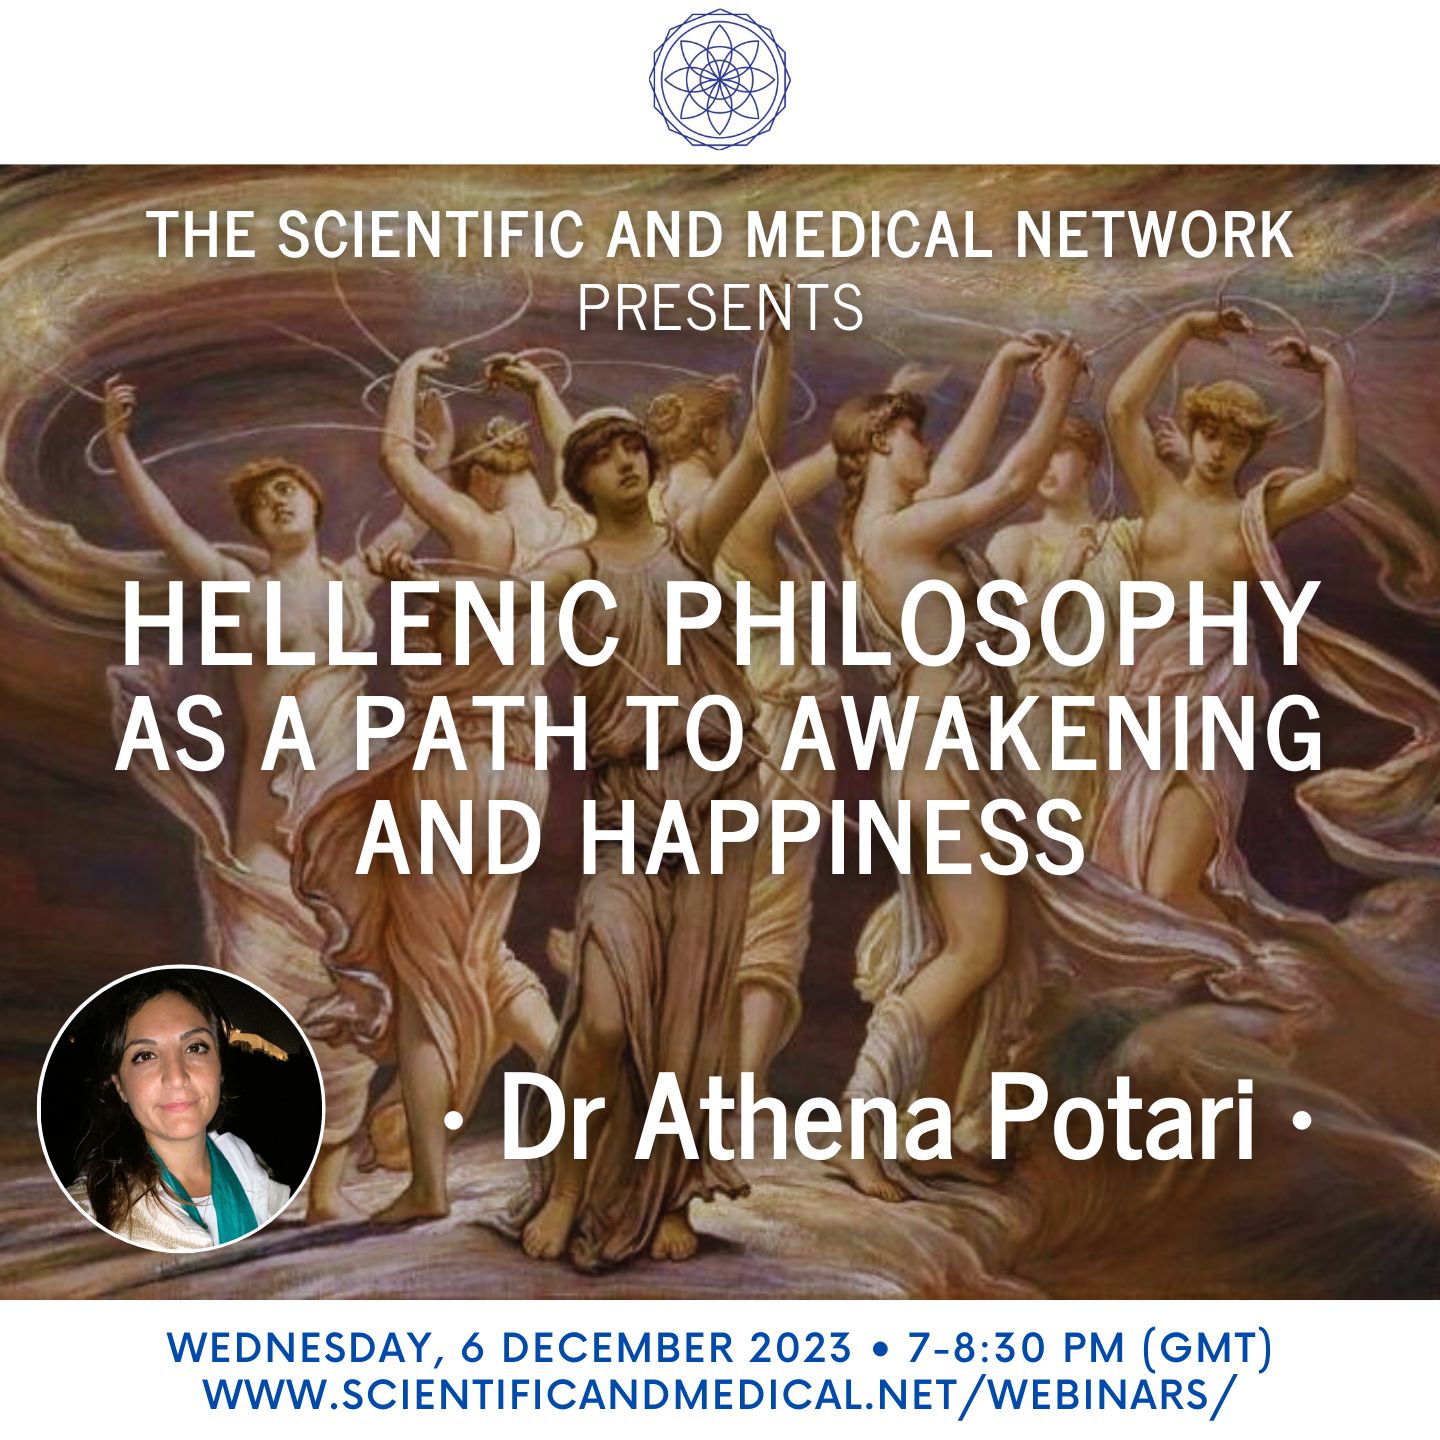 Dr Athena Potari Hellenic Philosophy as a Path to Awakening and Happiness